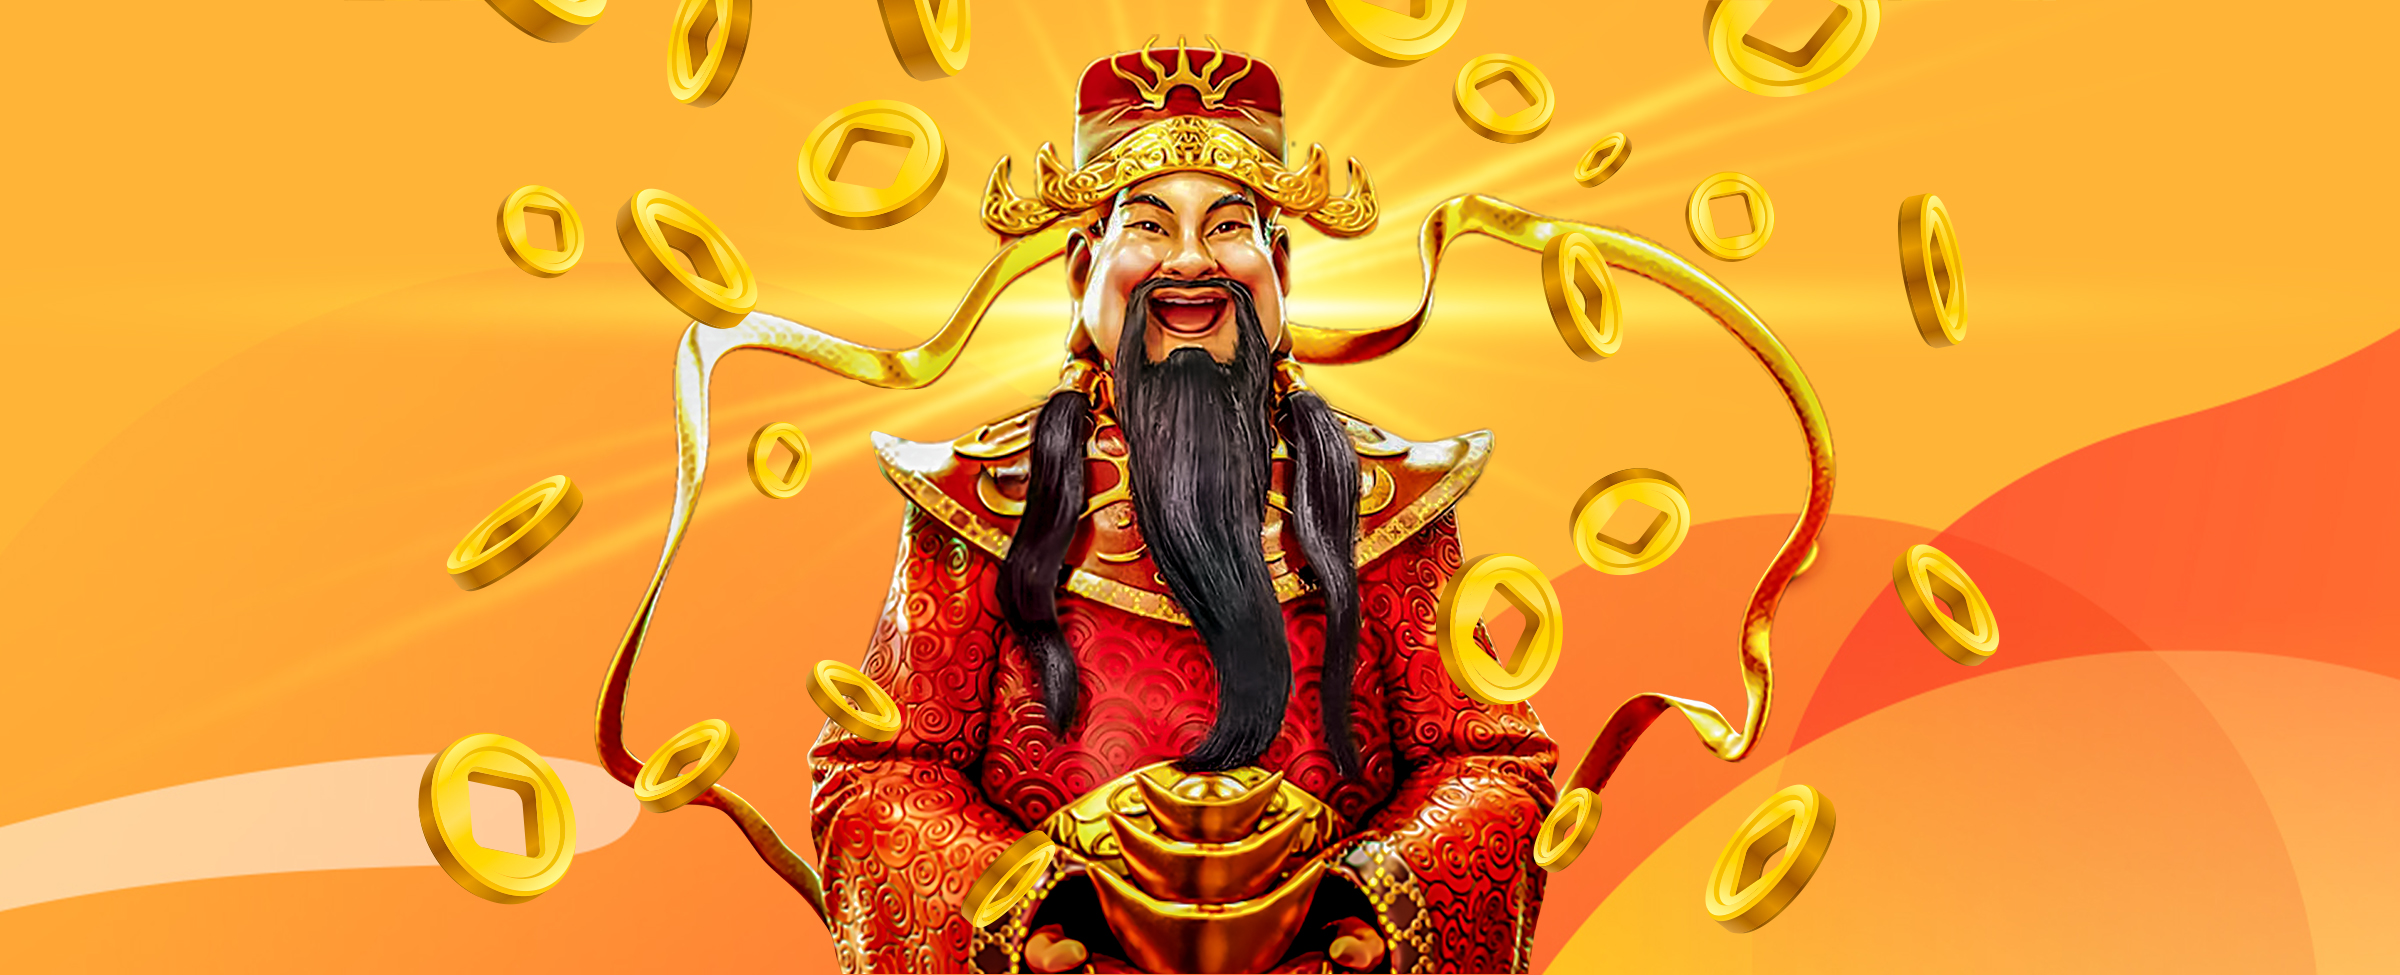 A cartoon character of Caishen from the SlotsLV slot game Caishen’s Fortune XL, cloaked in a red gown with a long beard and mustache surrounded by lucky coins